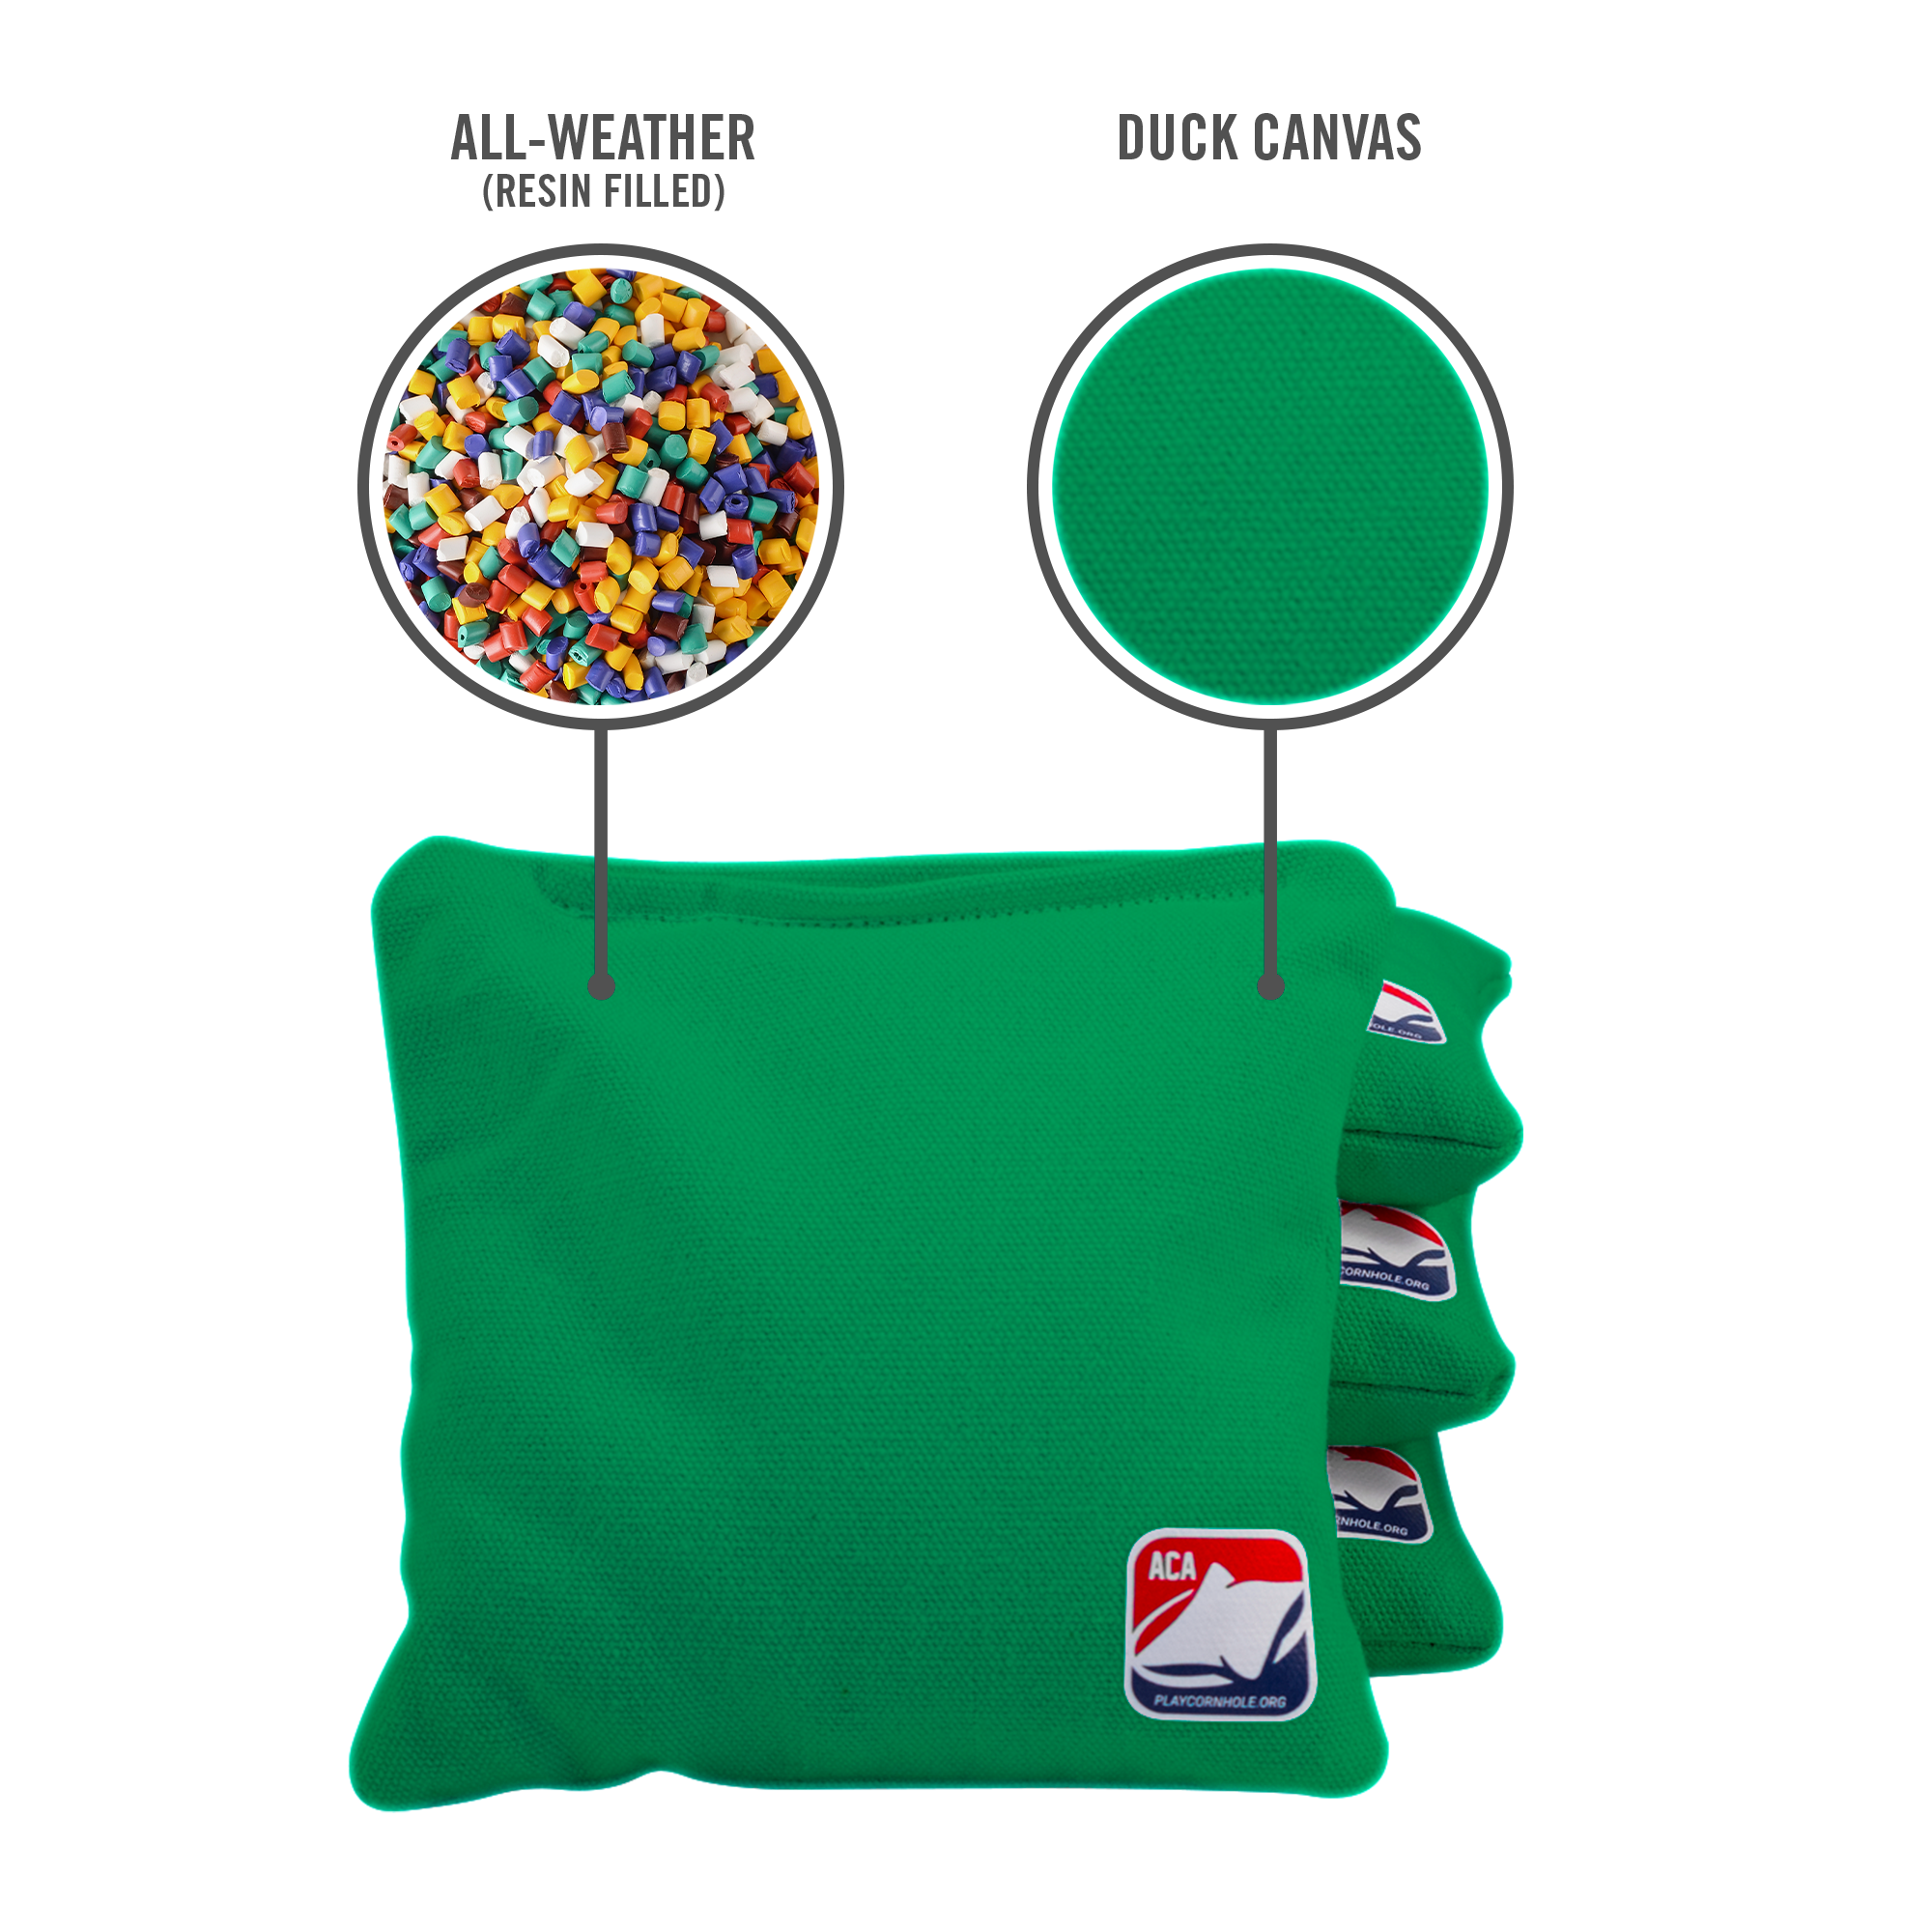 6-in Daily 66x Kelly Green Competition Regulation Cornhole Bags